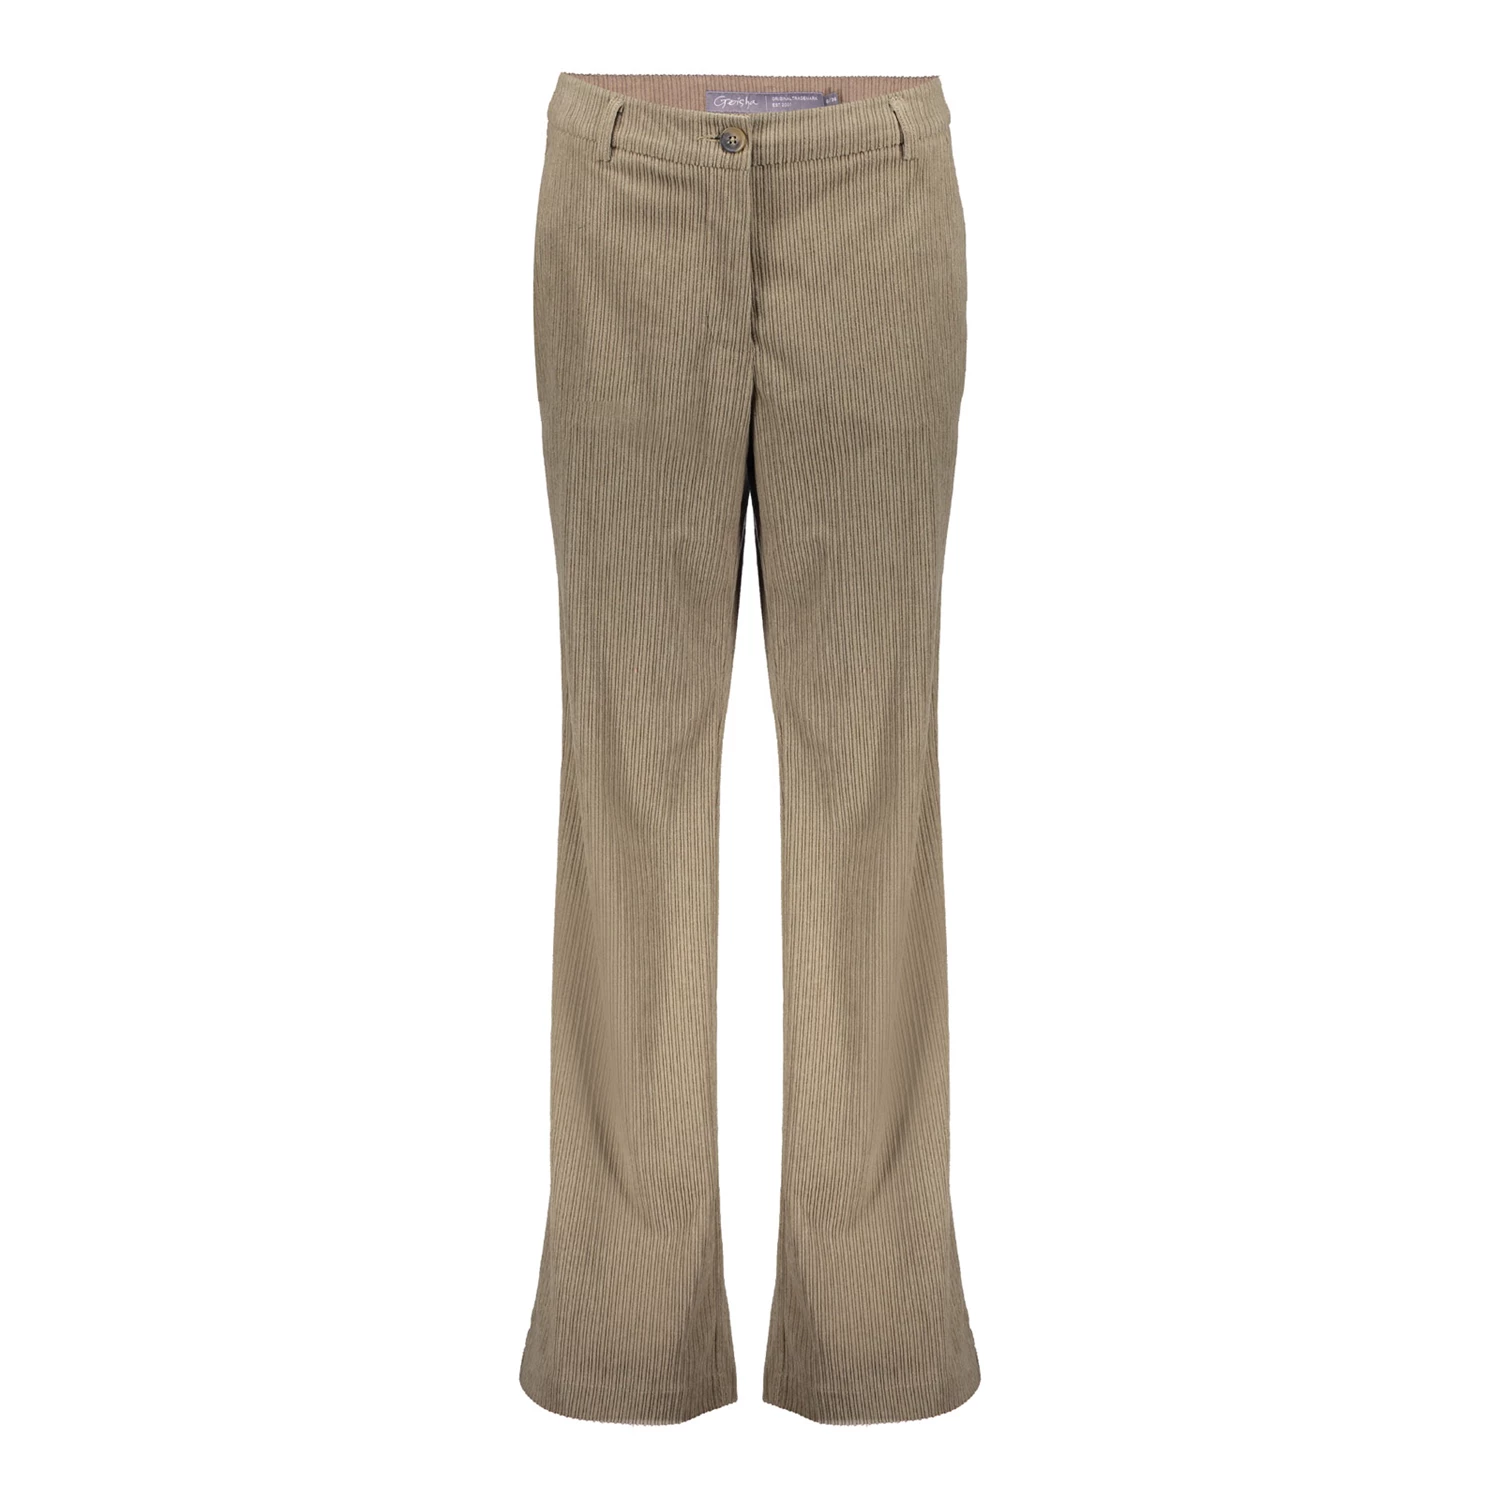 Corduroy pants for women | Buy online | ABOUT YOU